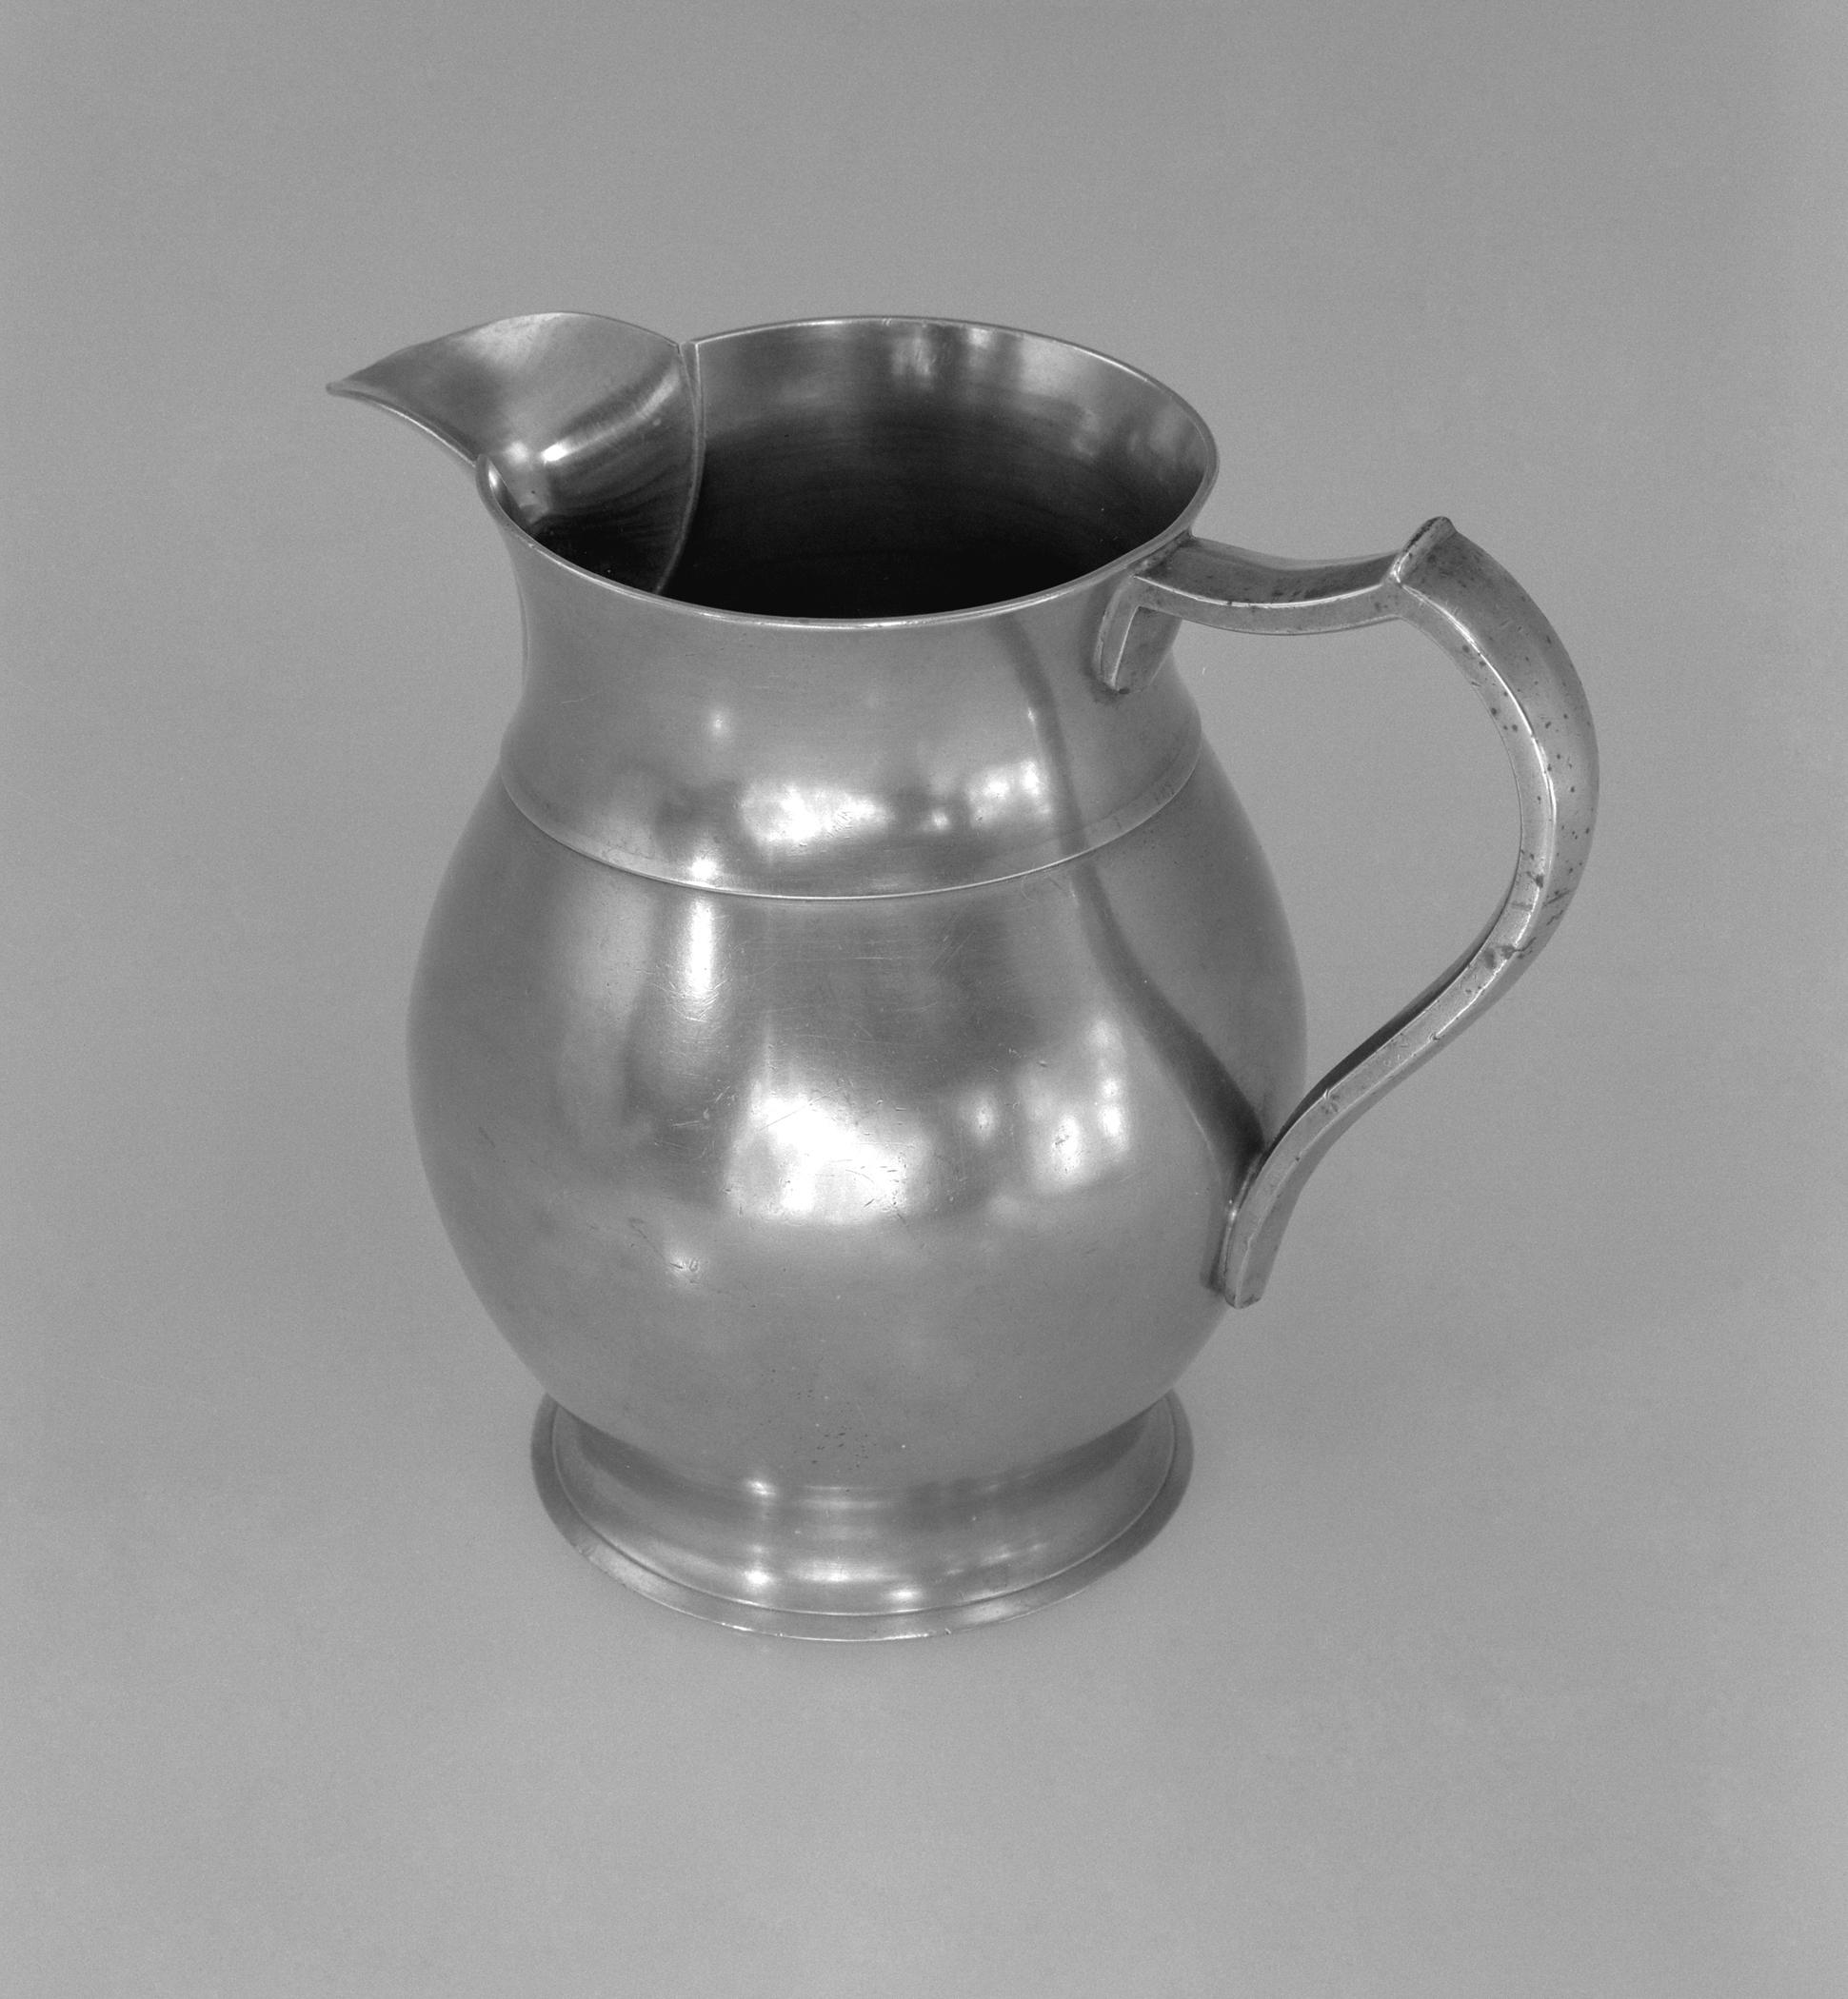 1956.0046.008 Pewter pitcher